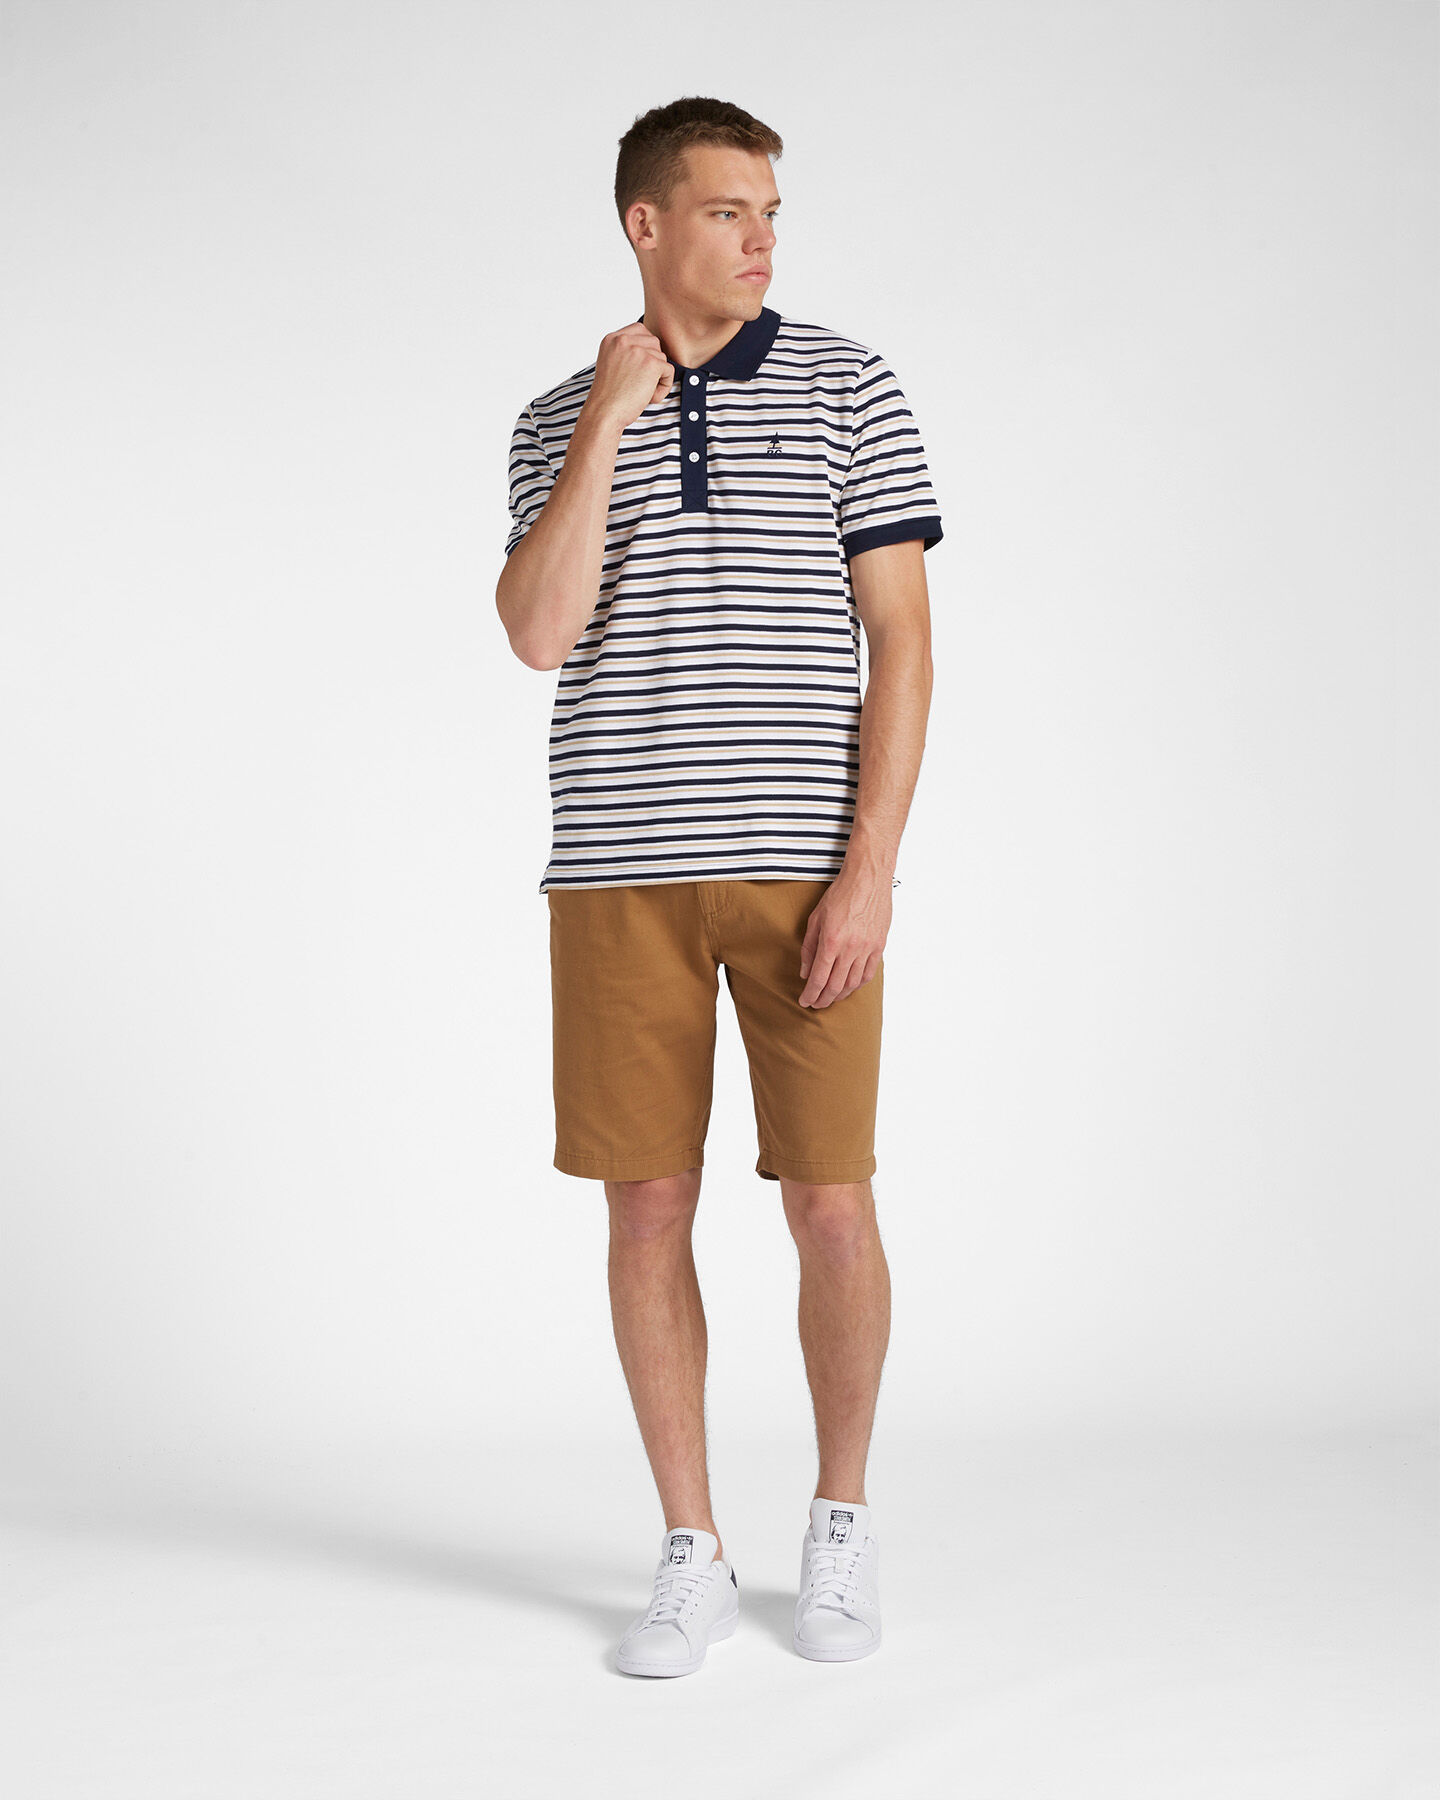  Polo BEST COMPANY HERITAGE M S4122348|519|S scatto 1